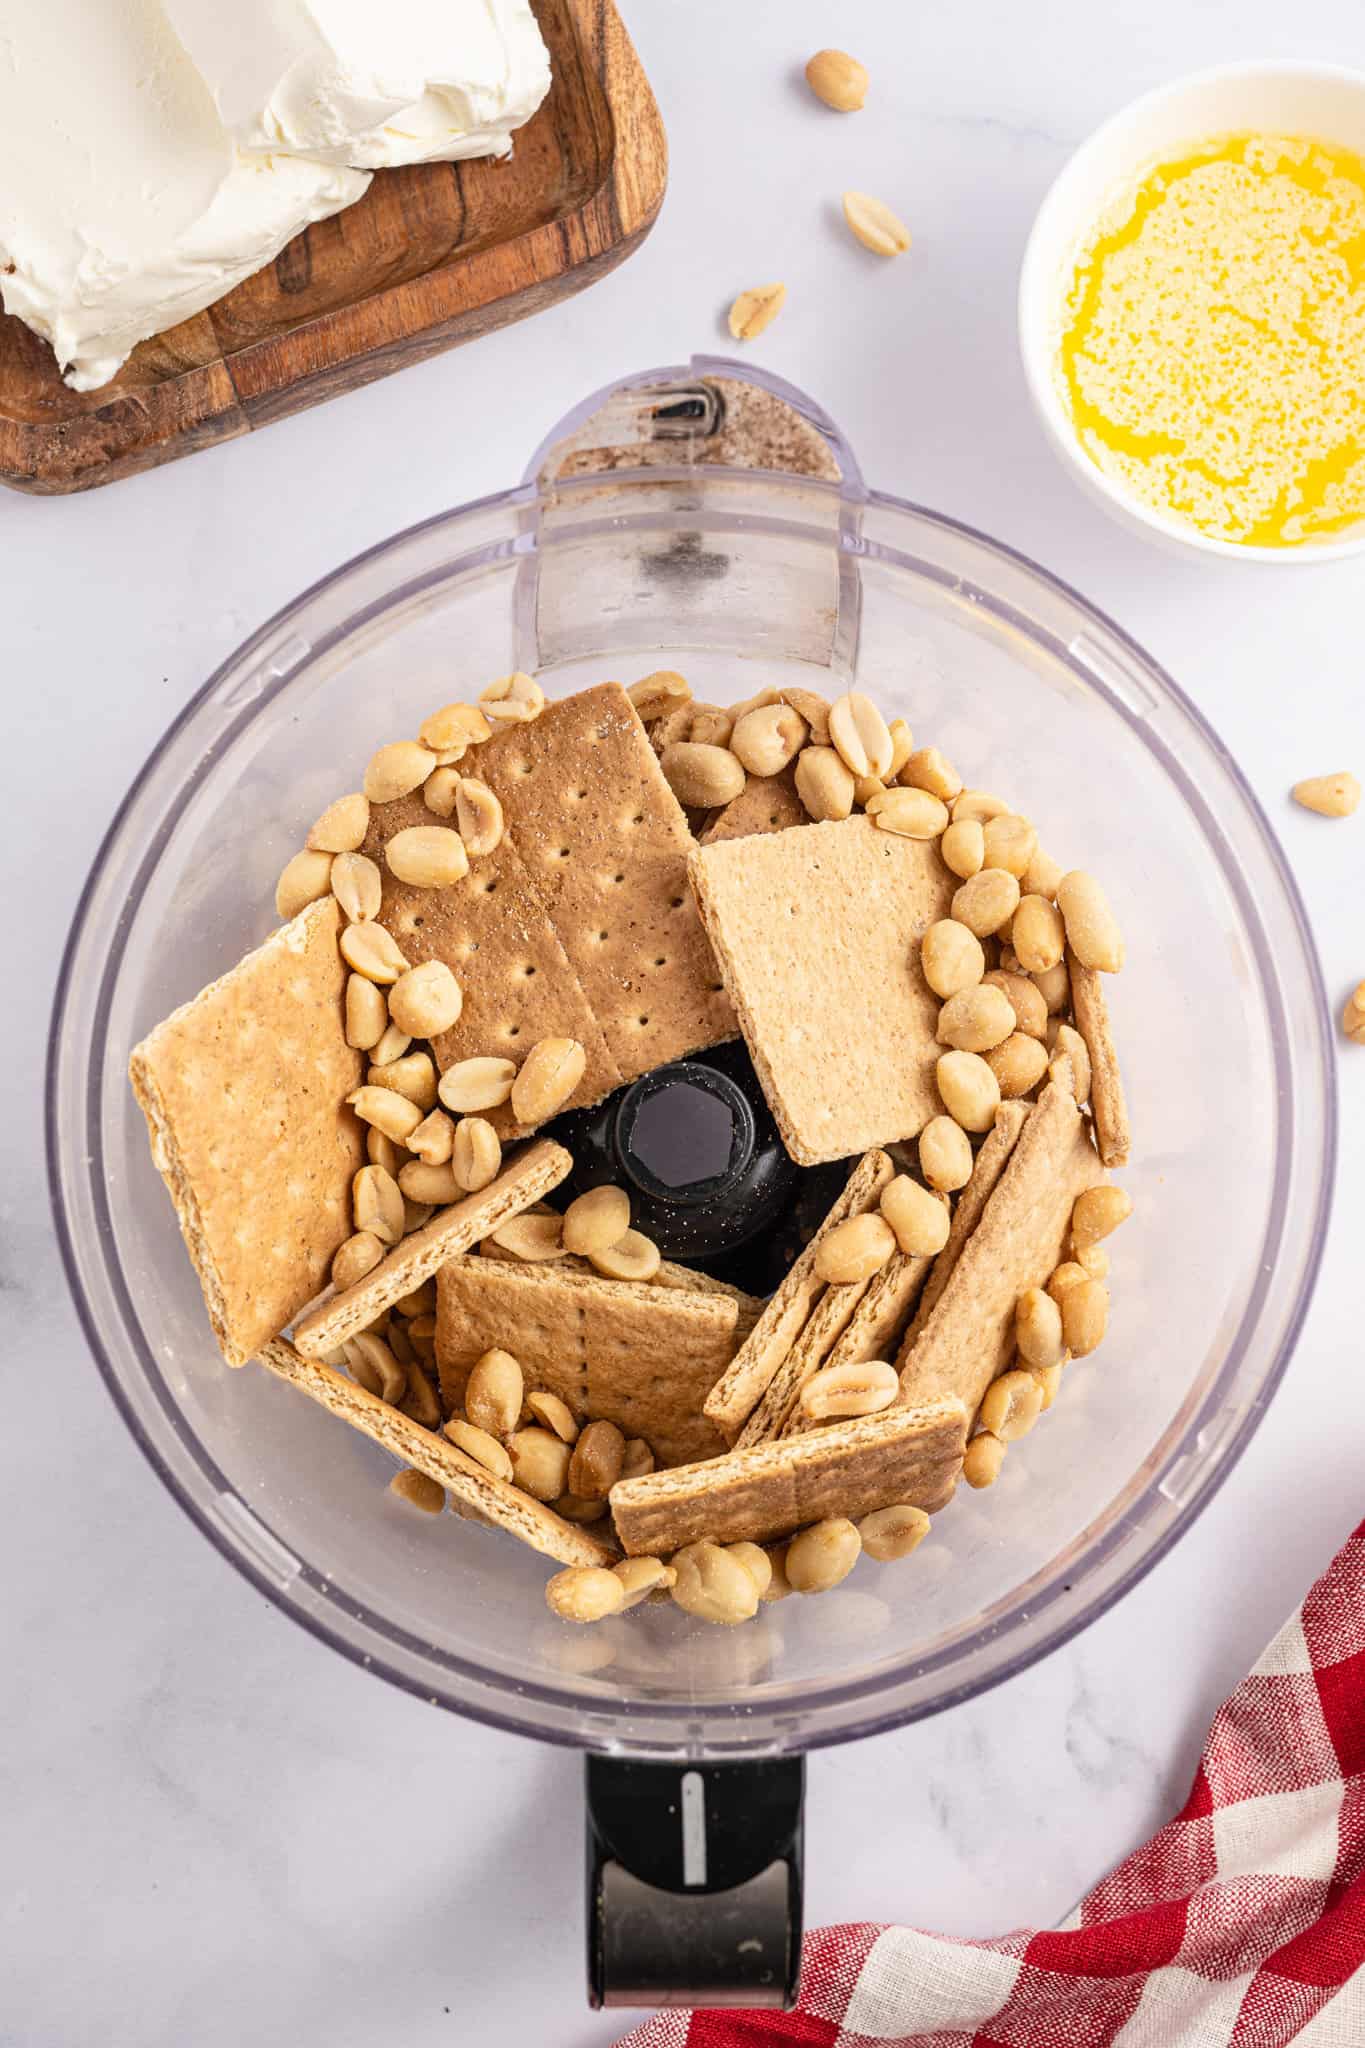 graham crackers and peanuts in a food processor